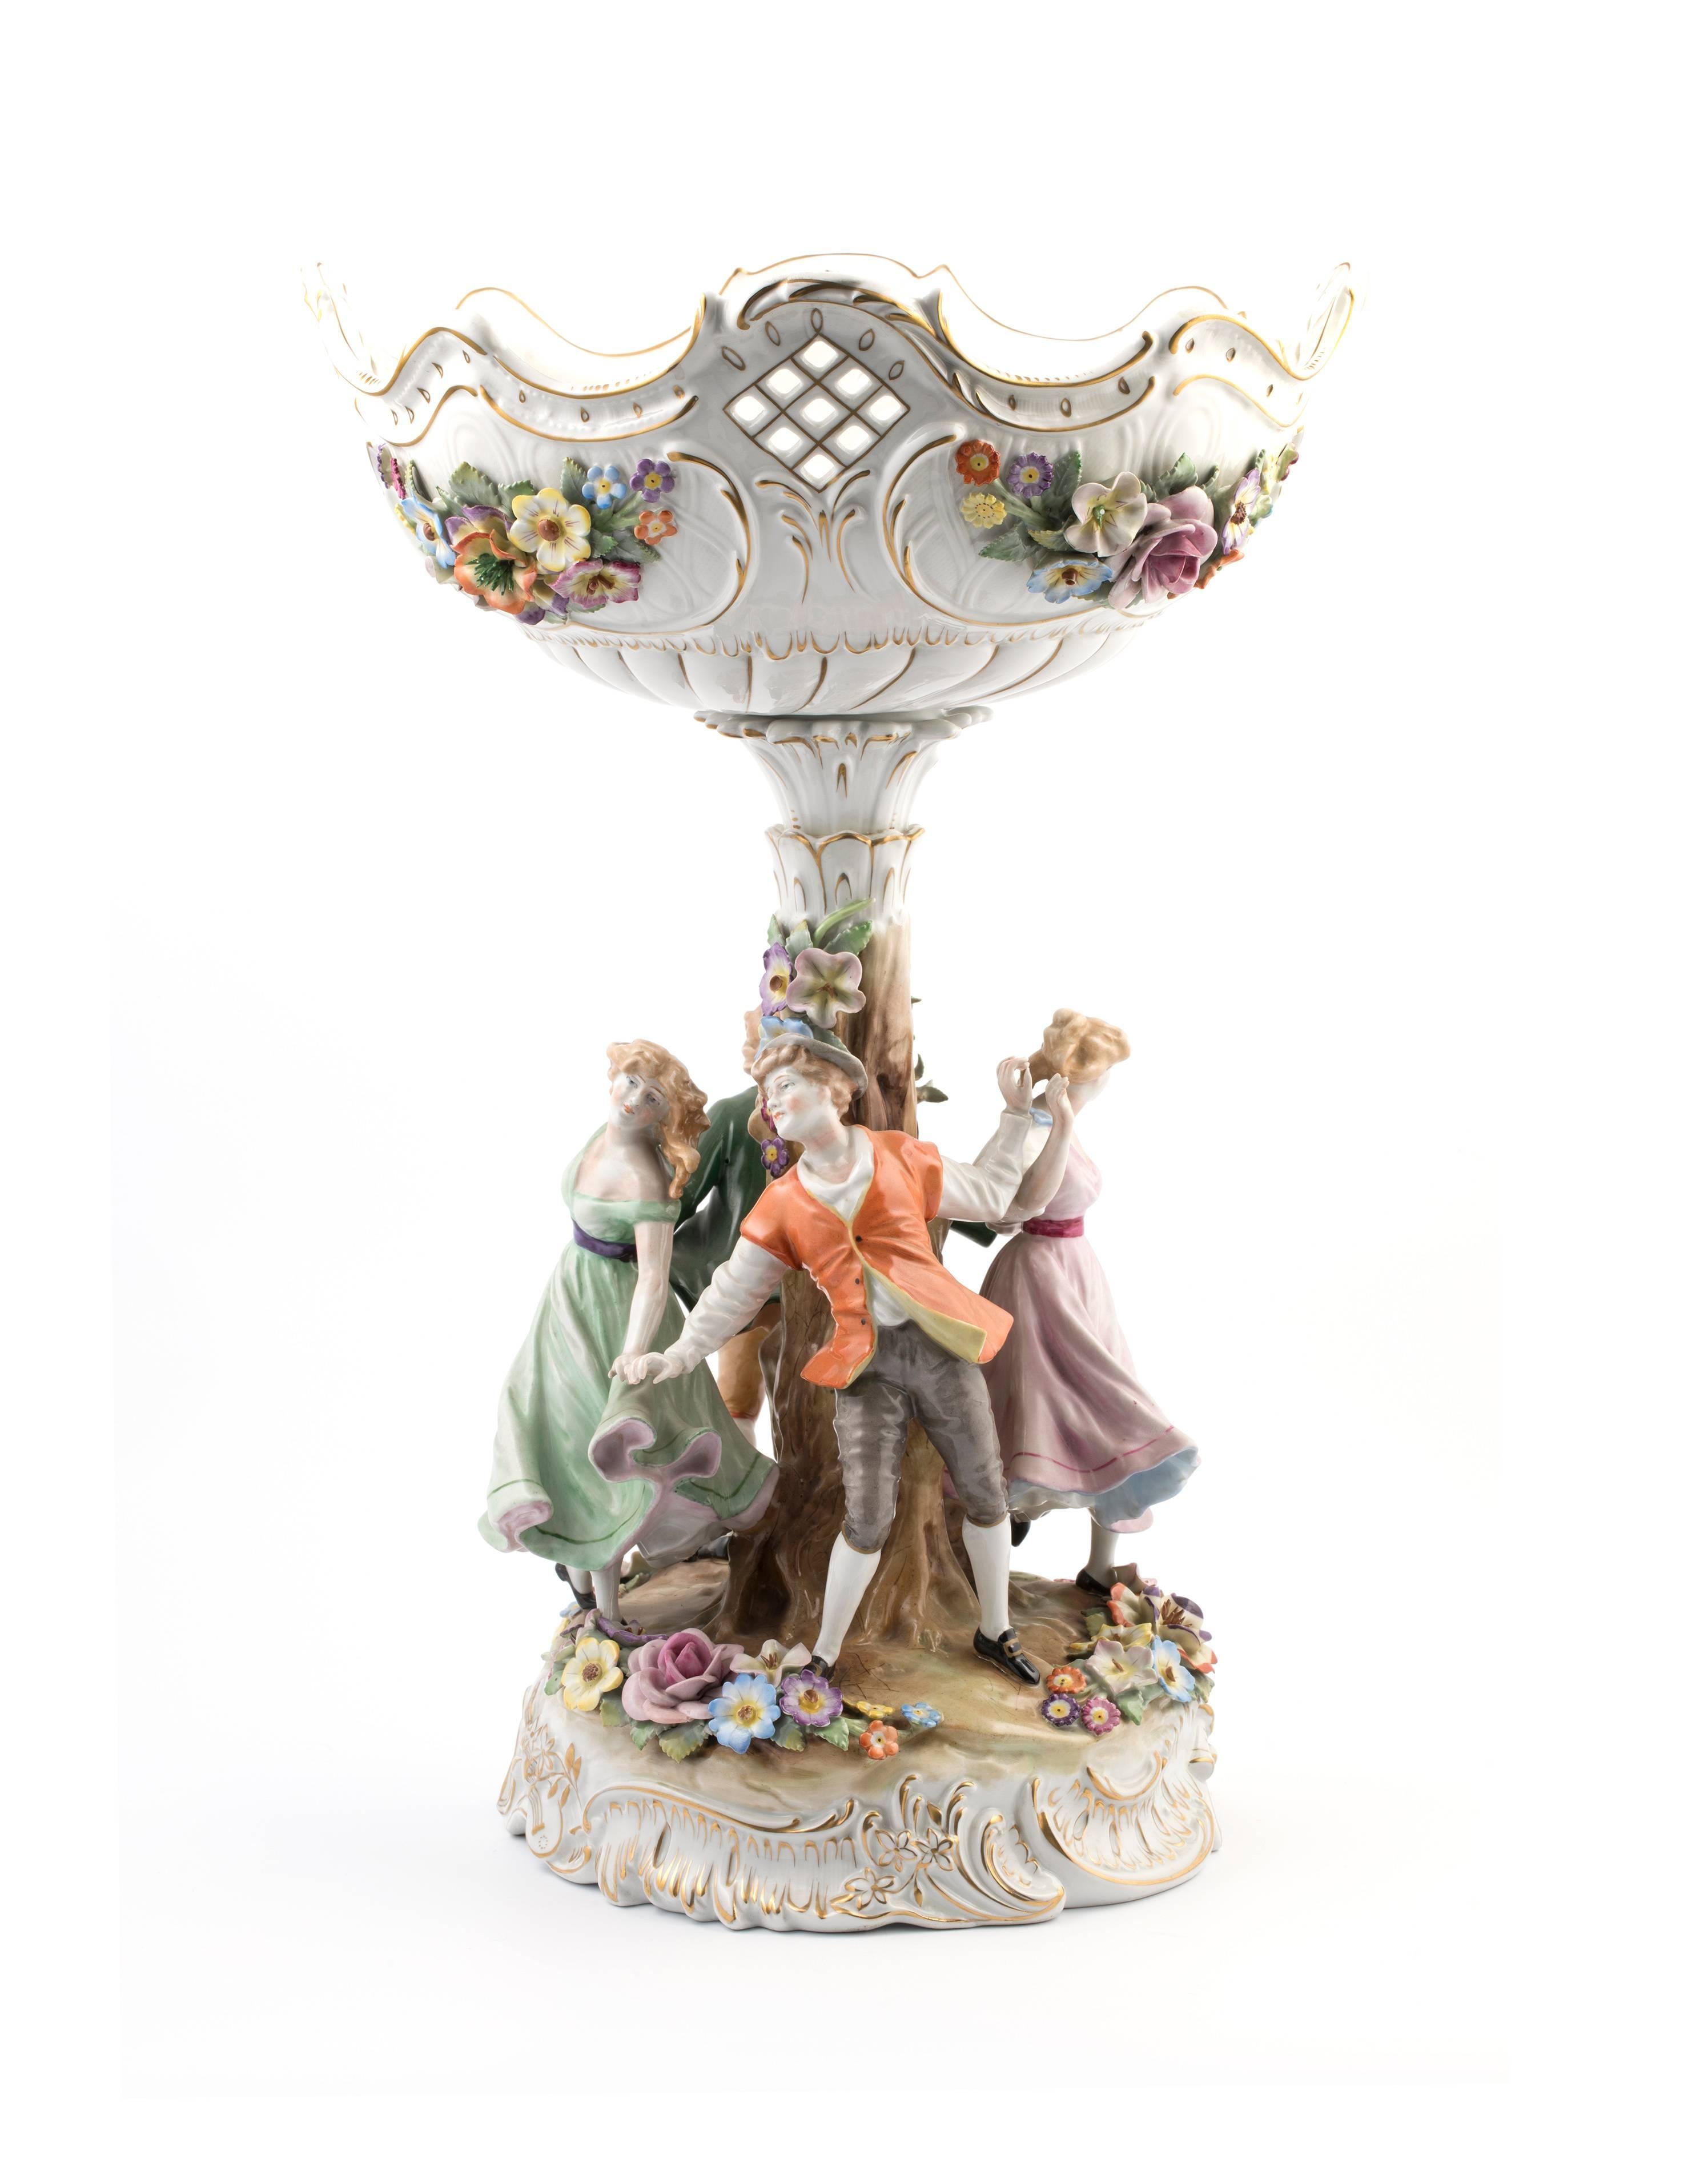 Porcelain centrepiece or compote. The compote consists of a reticulated round bowl with scalloped edge and profuse floral encrustation. The bowl fits onto a central stylized tree like column that is surrounded by four dancing boys and girls.
On a